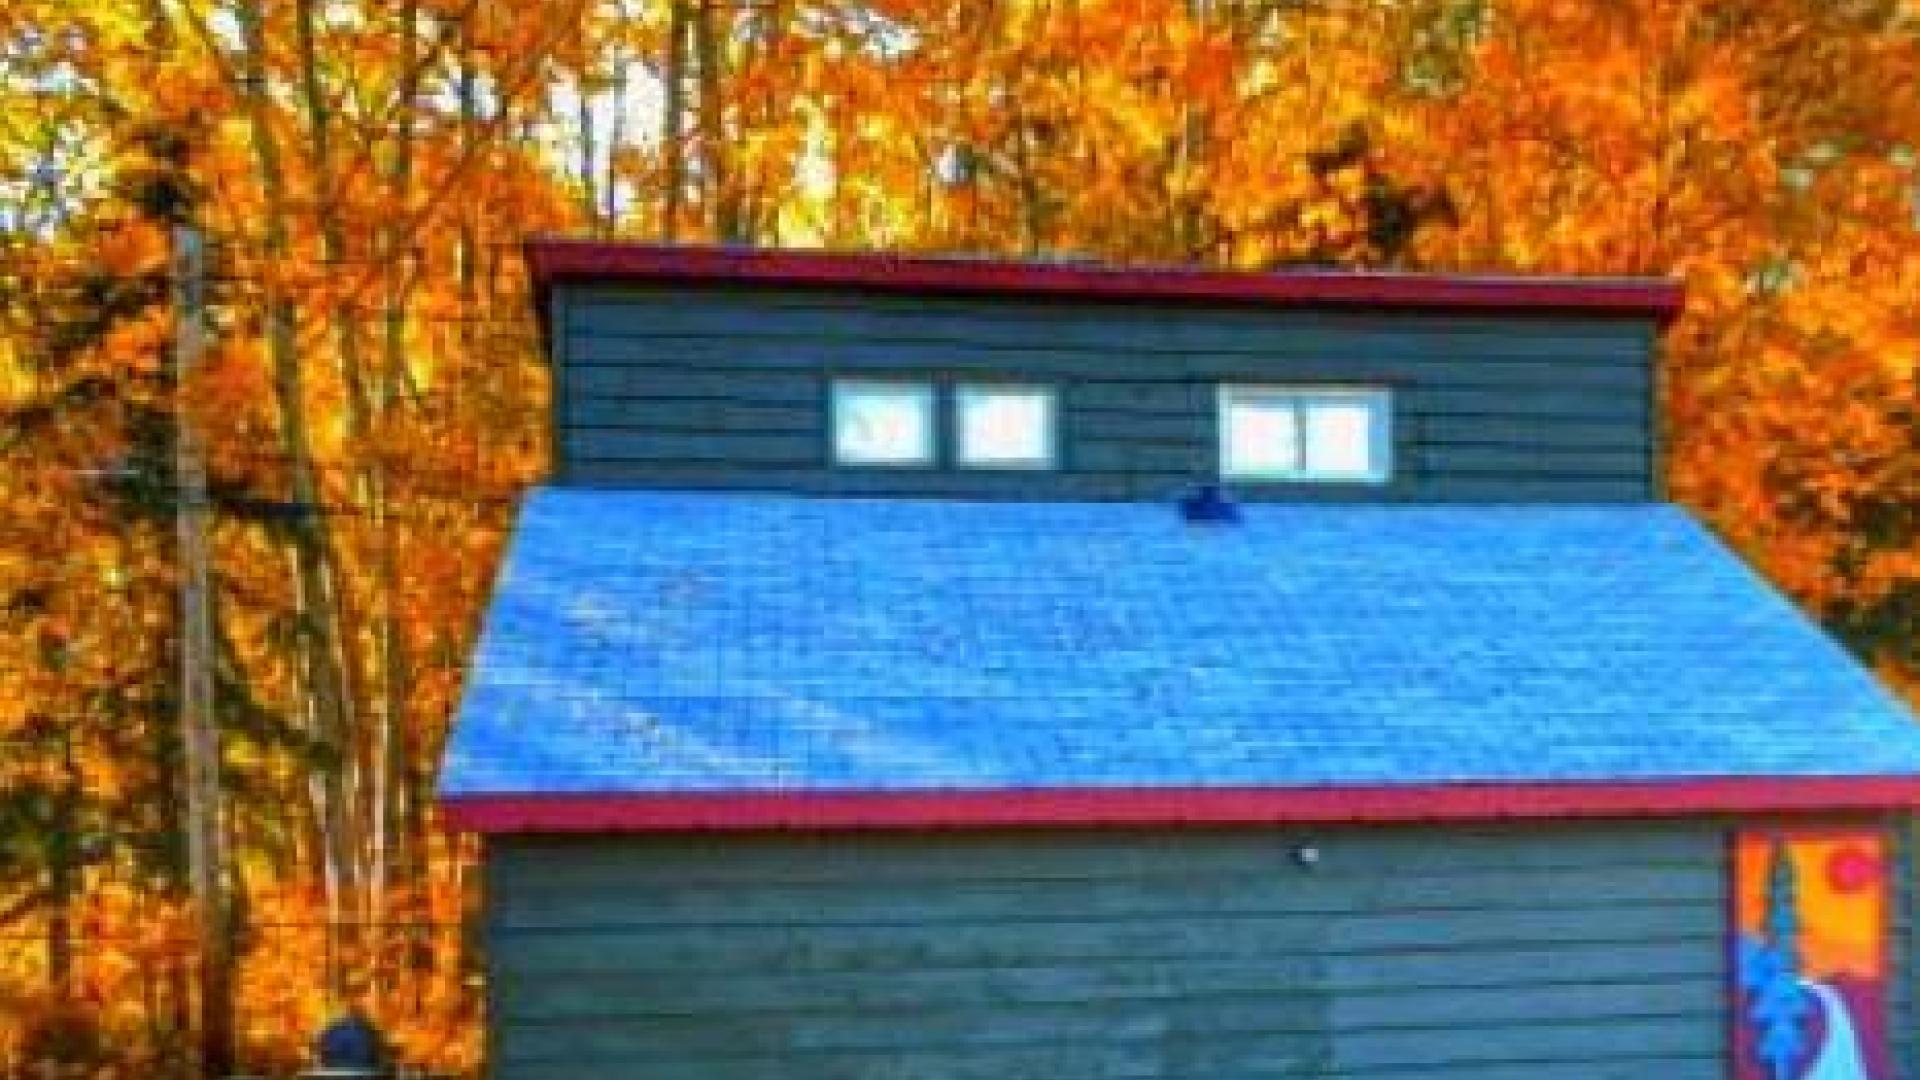 Blue Cabin in the middle of the woods. The trees have orange leaves.